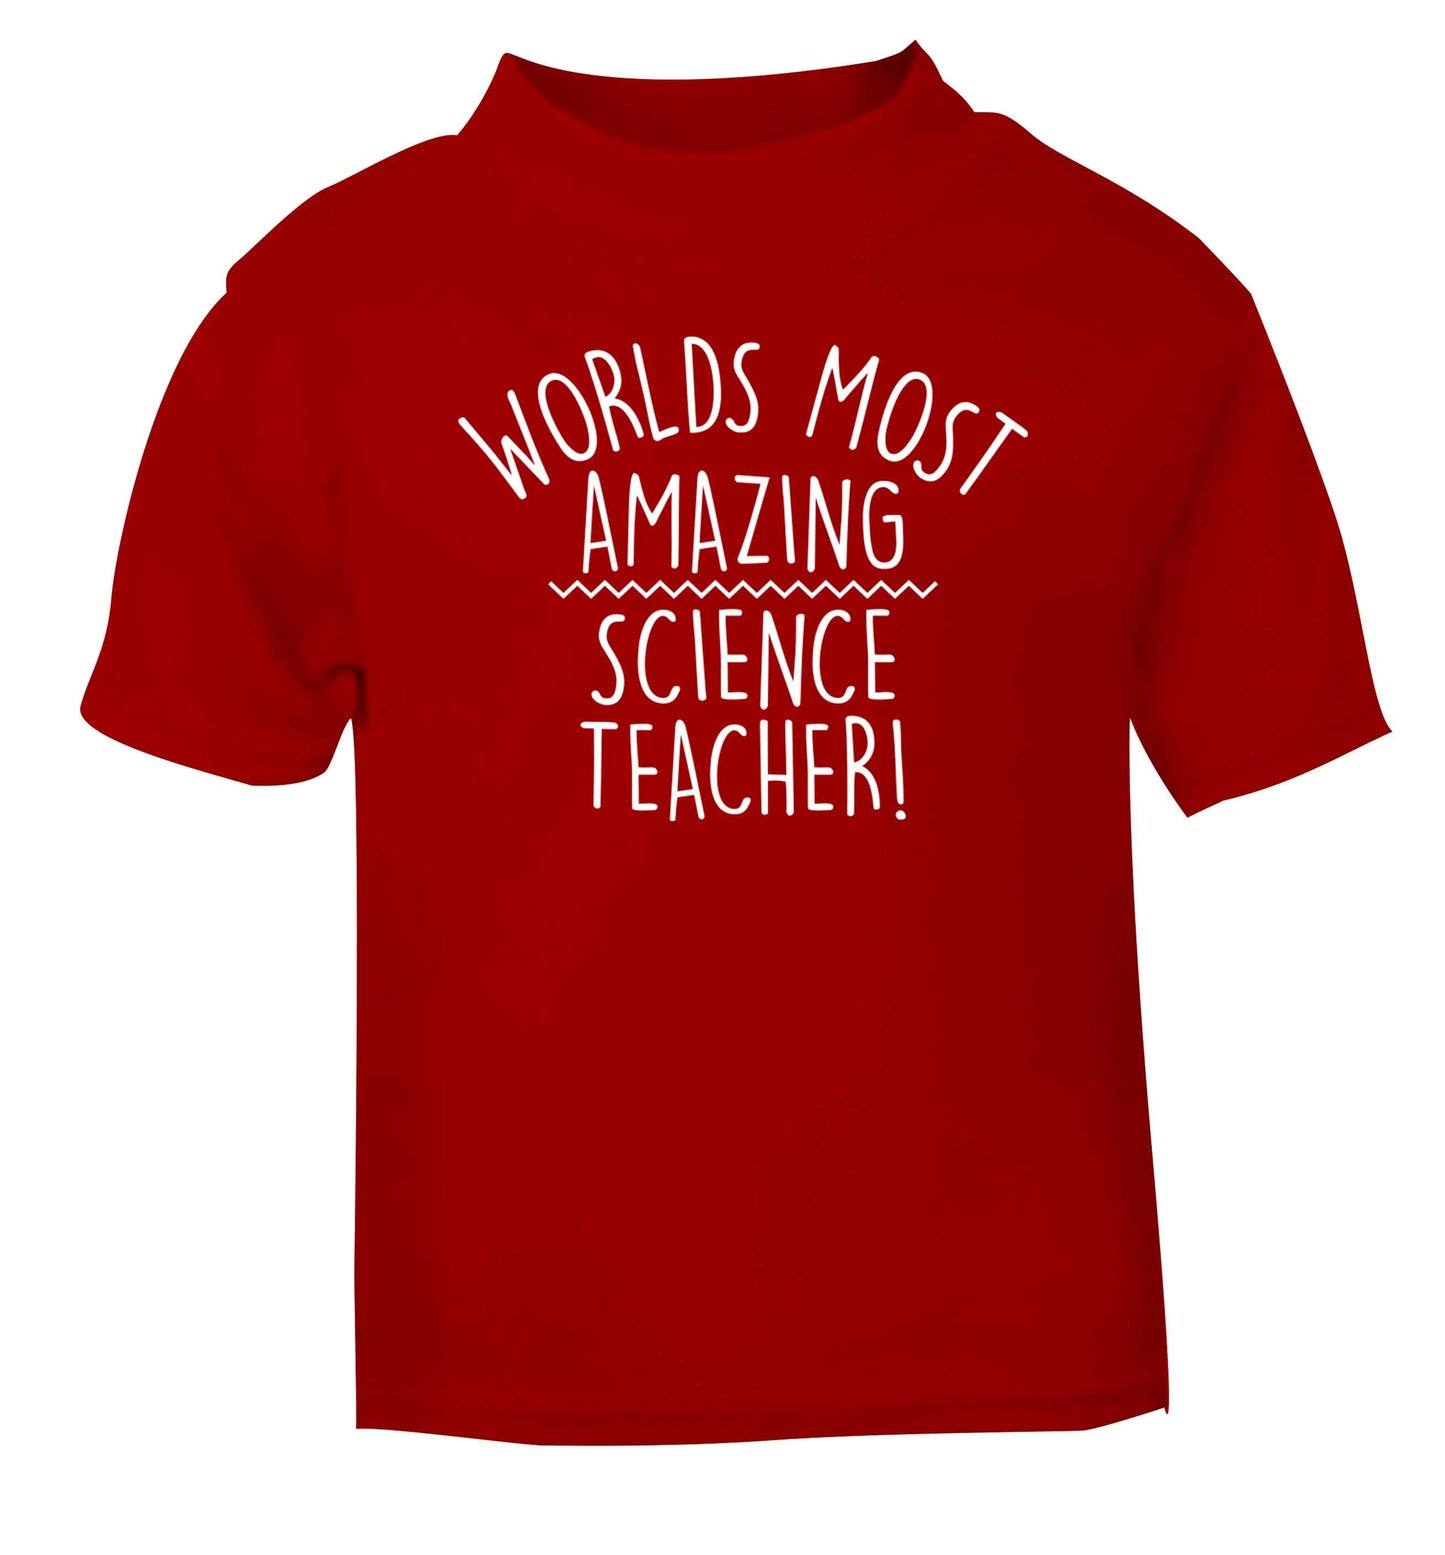 Worlds most amazing science teacher red baby toddler Tshirt 2 Years